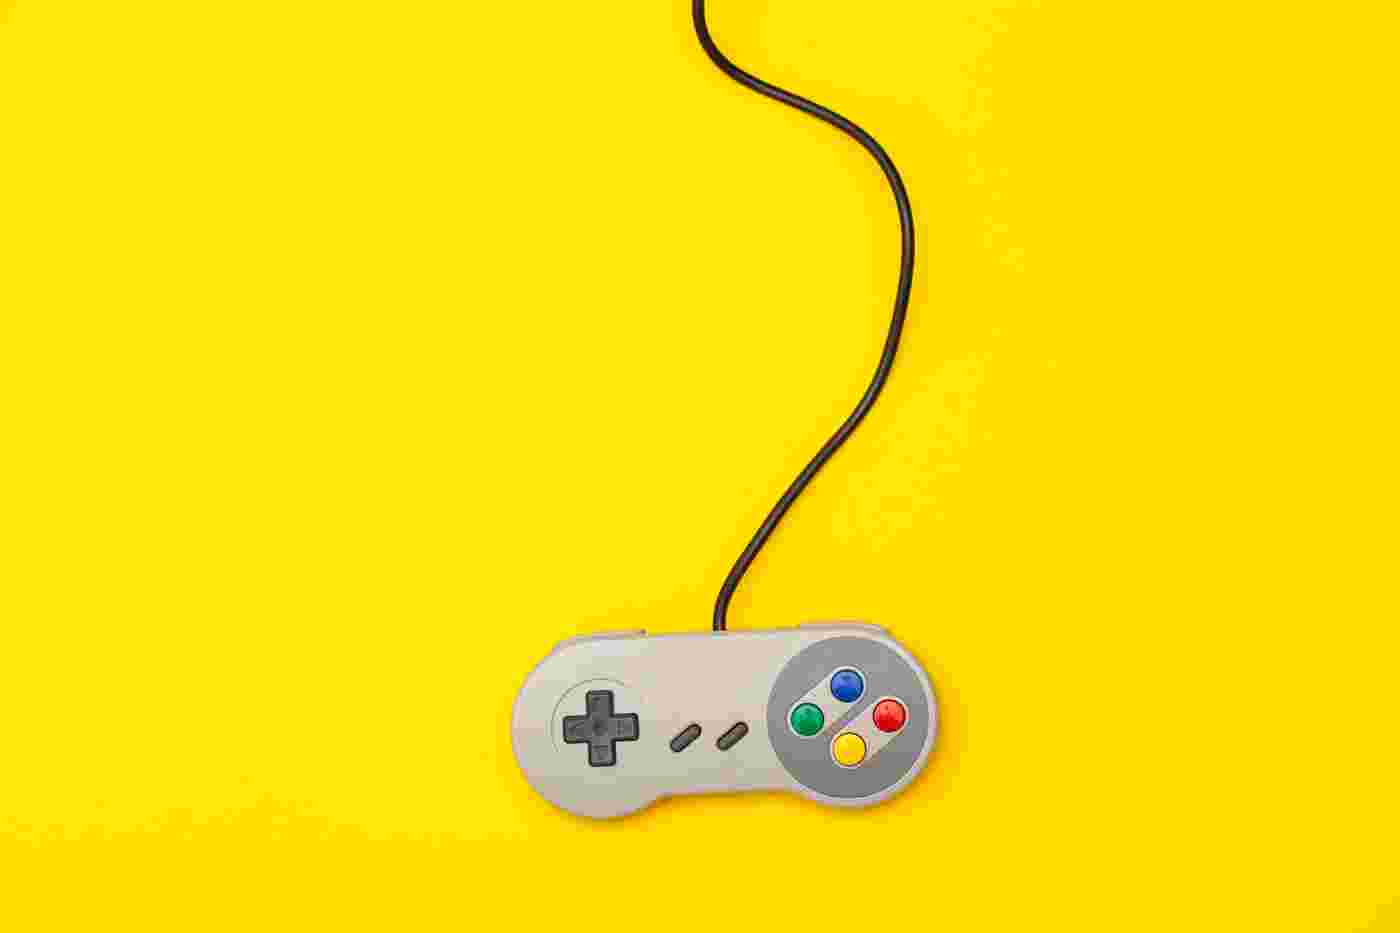 Video Game Retro Computer Gaming Controller On A Yellow Backg R46PWA7